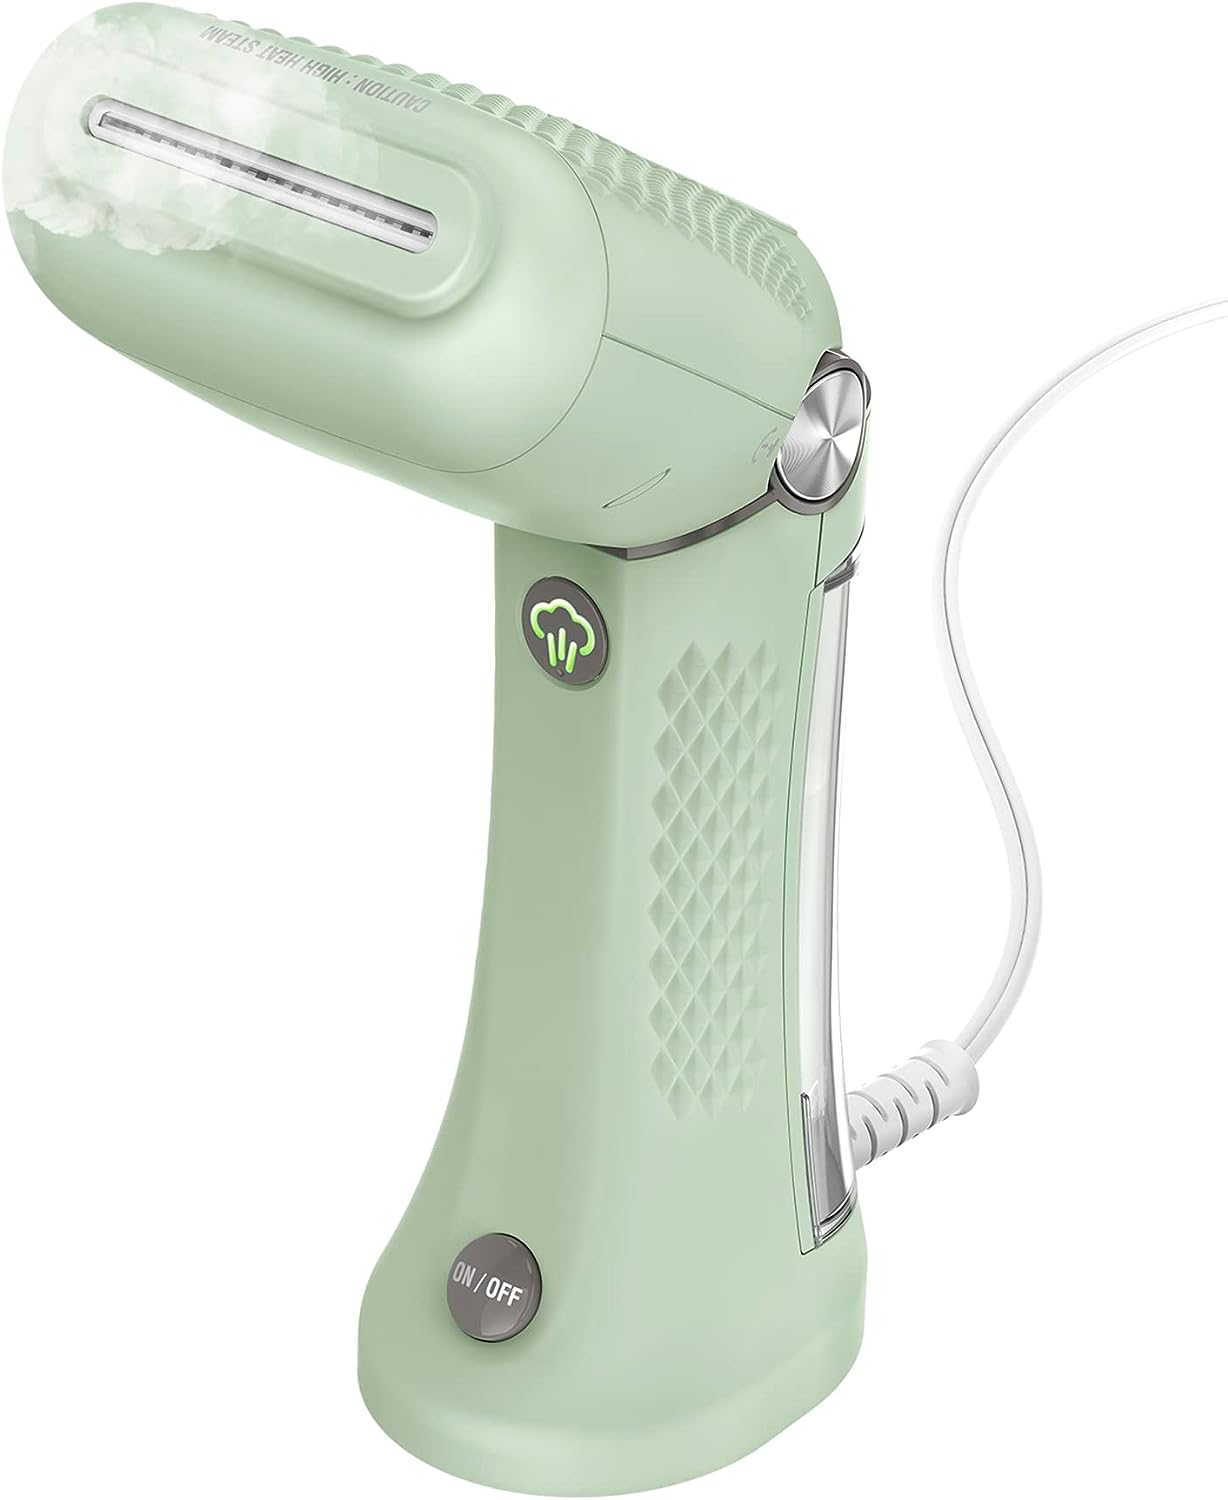 Travel Garment Steamer for Clothes with Dual Voltage